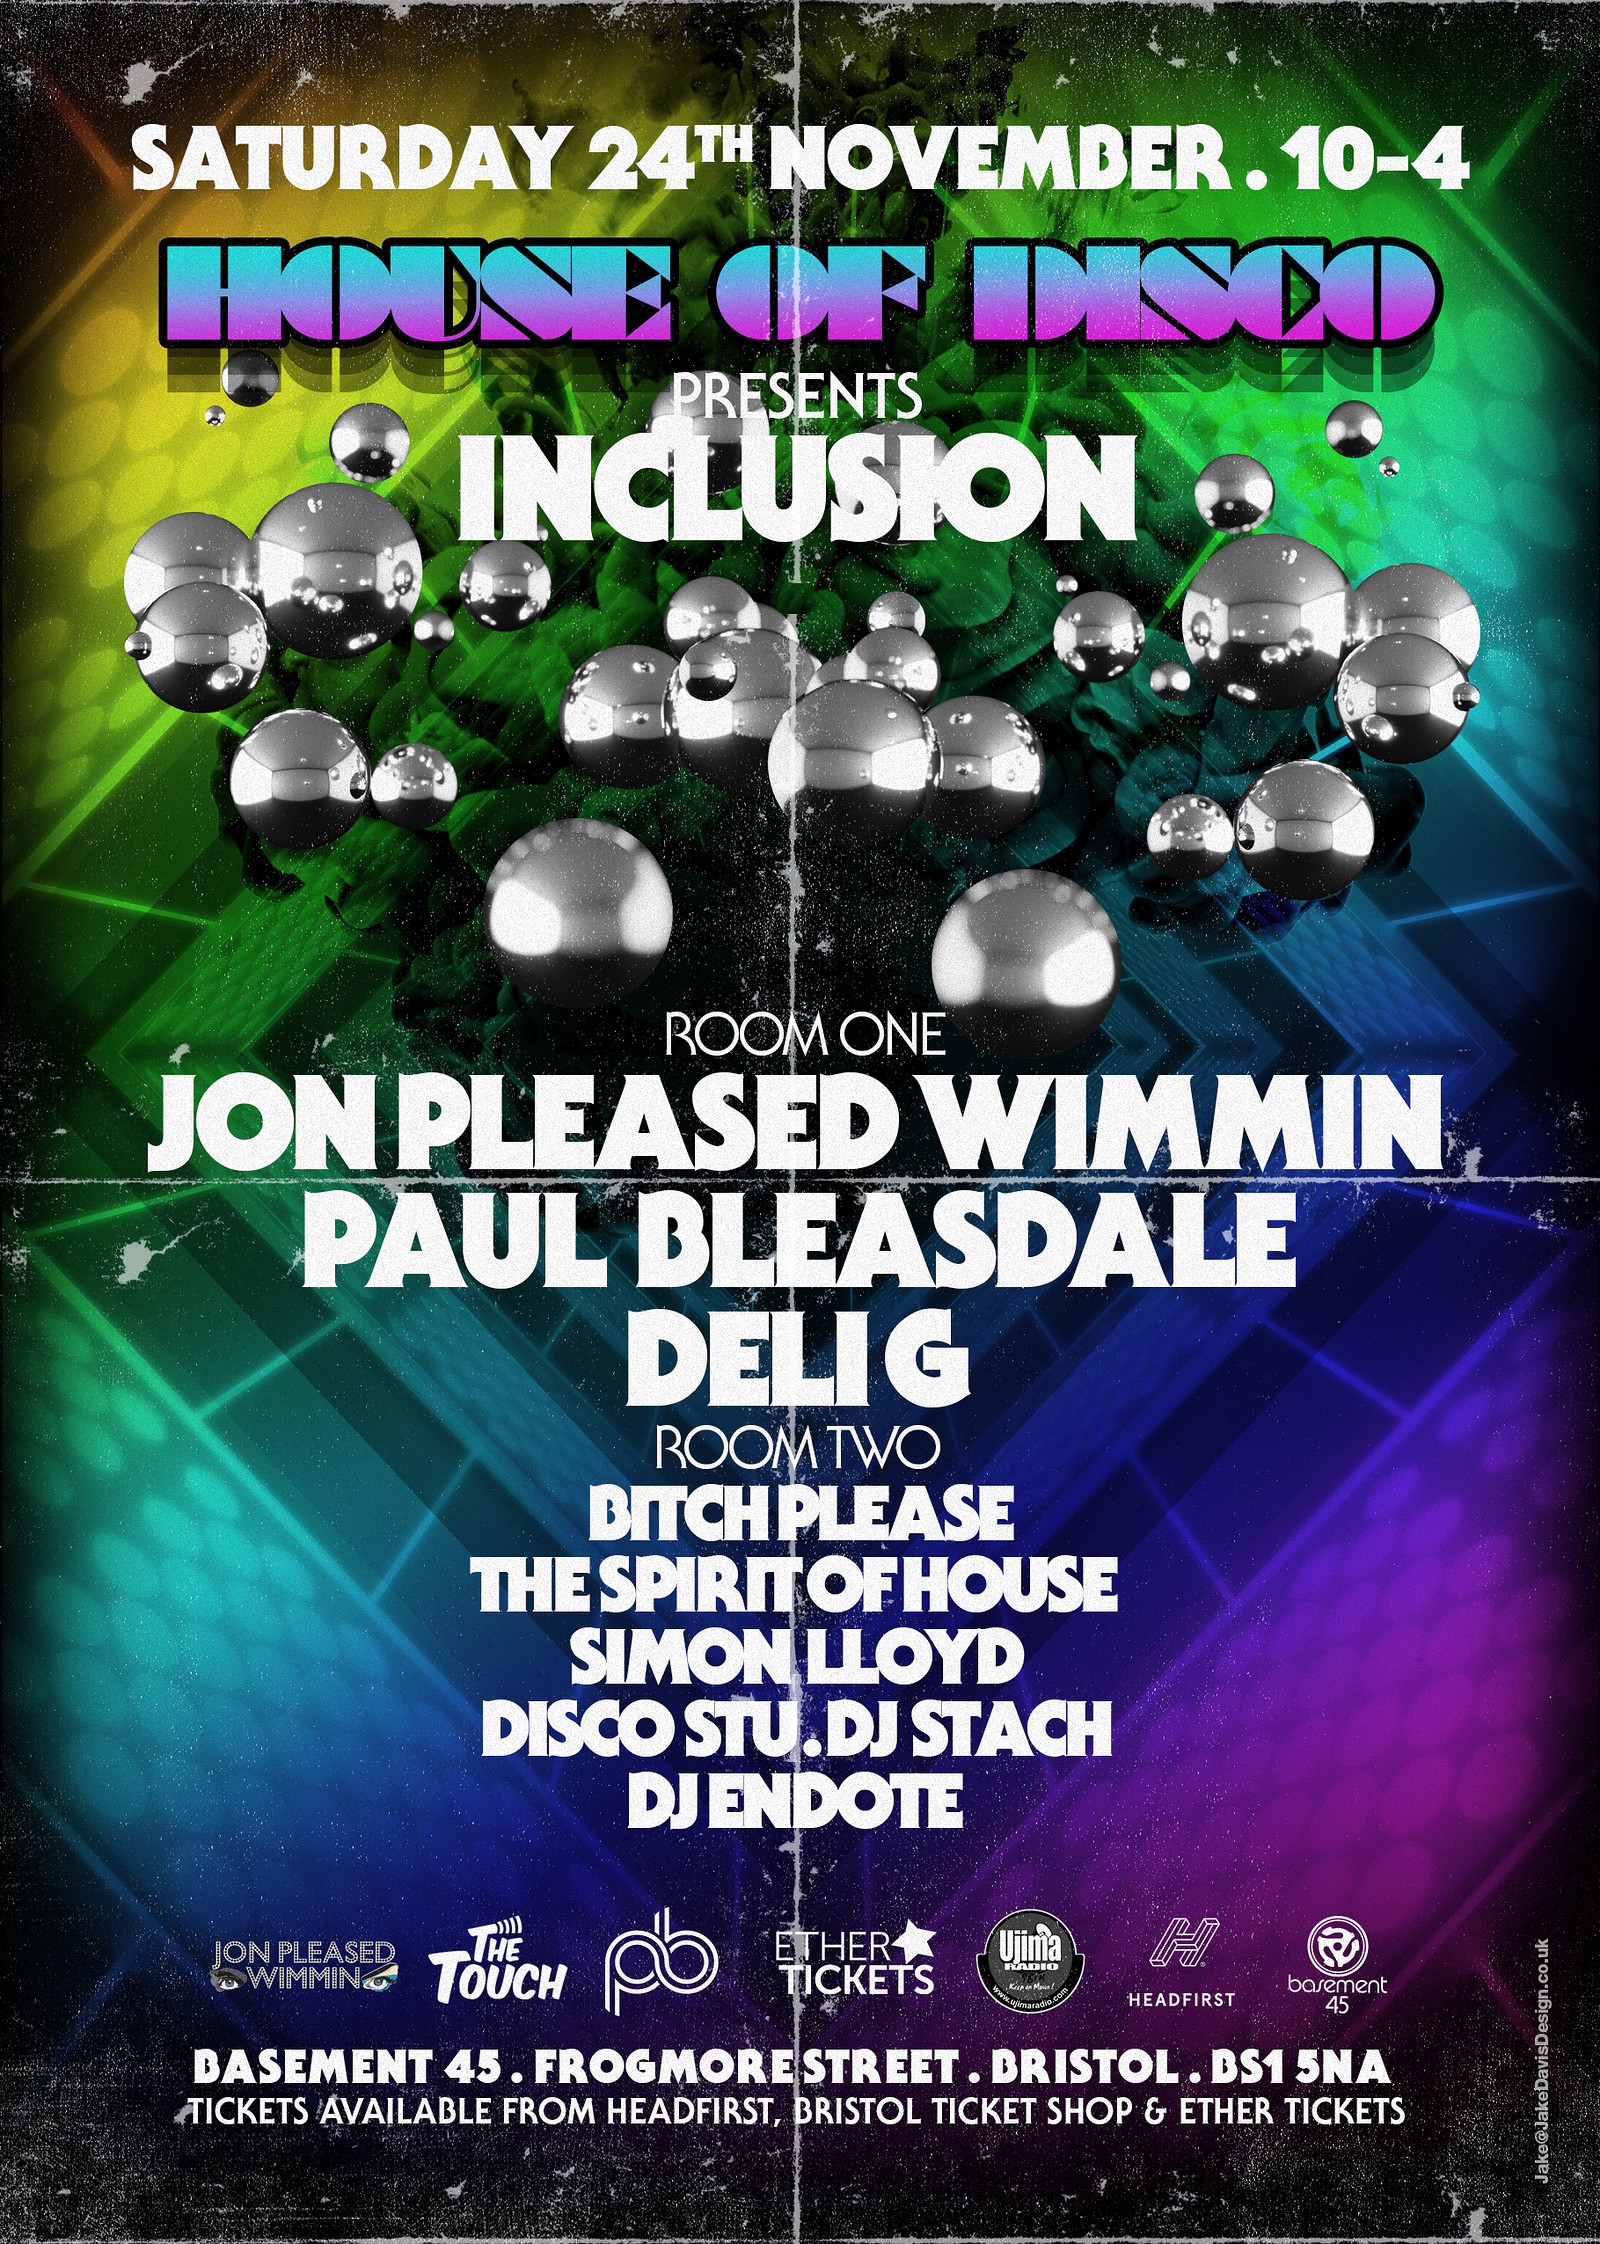 House of Disco presents Inclusion at Basement 45